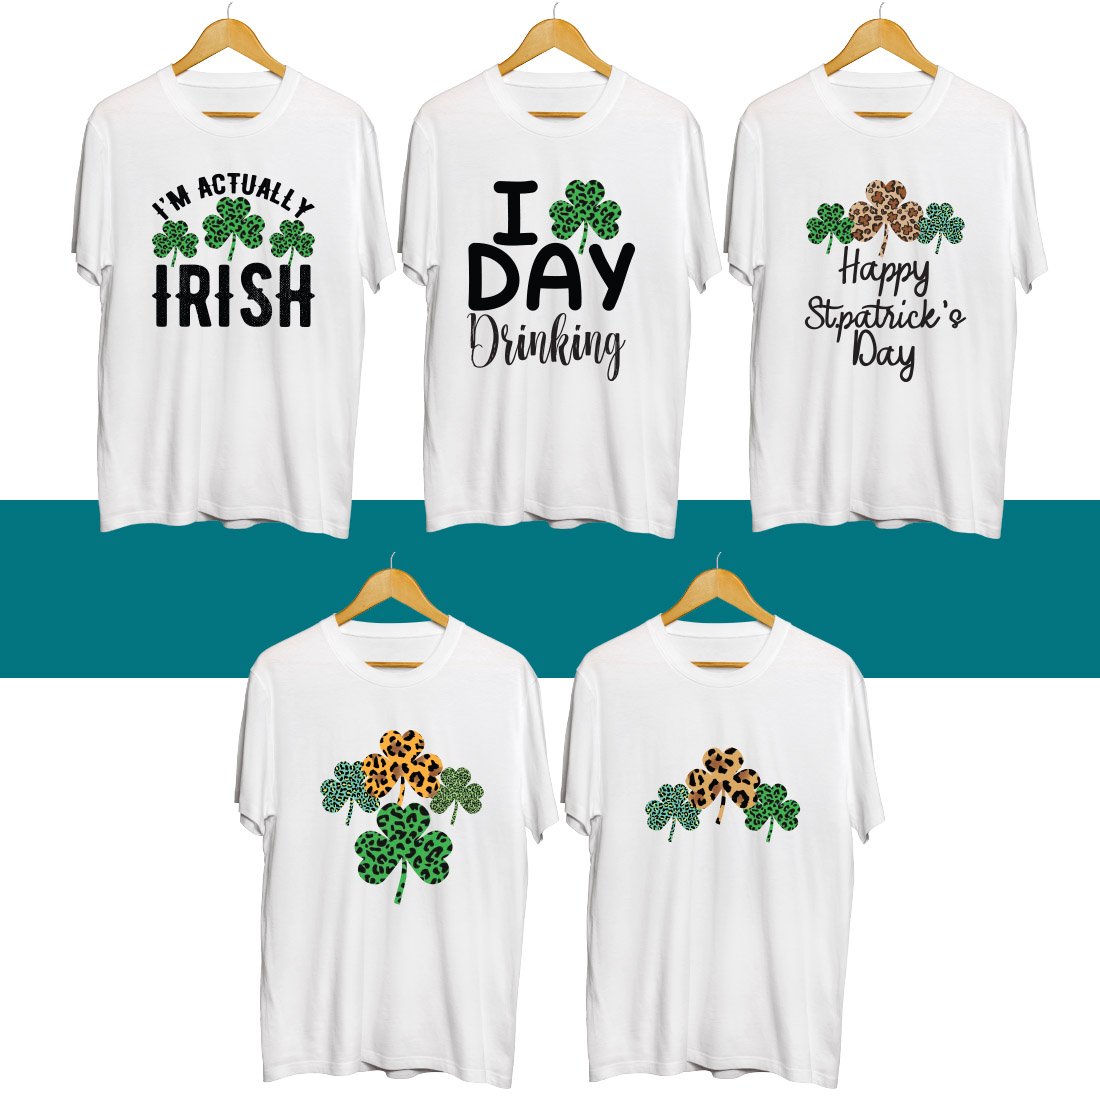 Four st patrick's day shirts on a hanger.